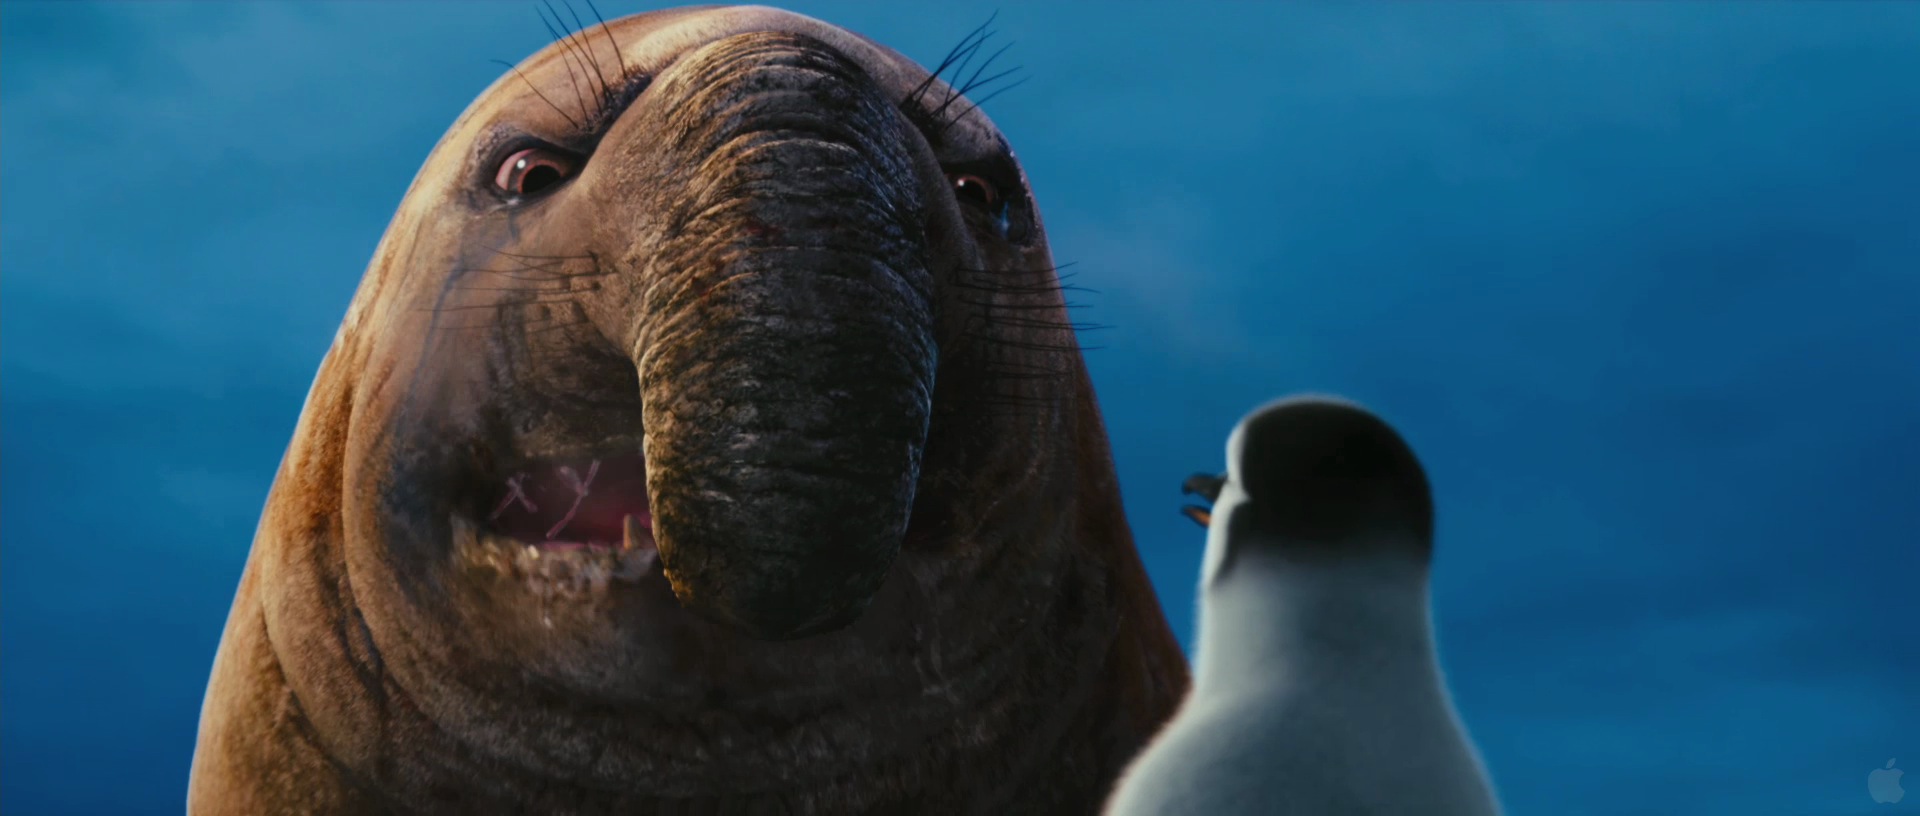 Mumble and the Elephant Seal in Happy Feet Two Desktop Wallpaper